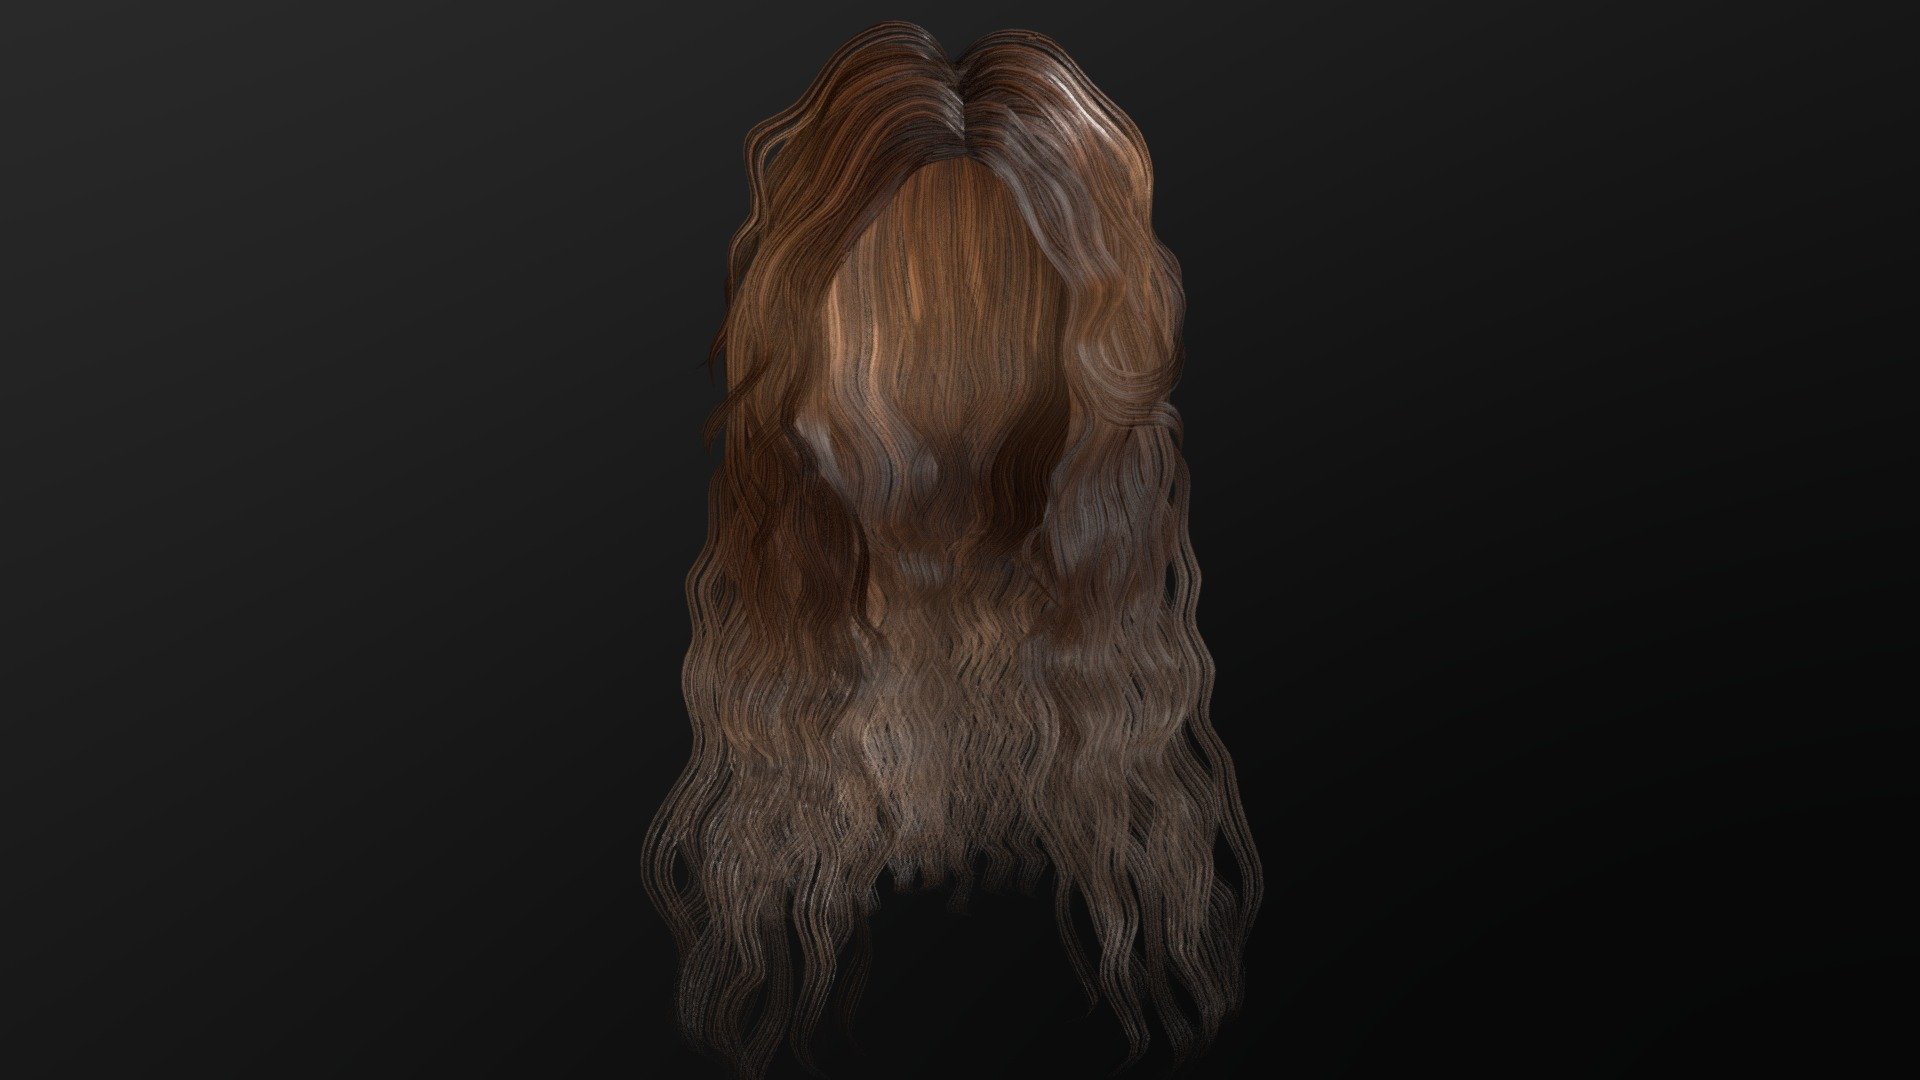 Woman Hairstyle Buy Royalty Free 3d Model By Antaress3d Antaress0083 4a14776 Sketchfab 2162